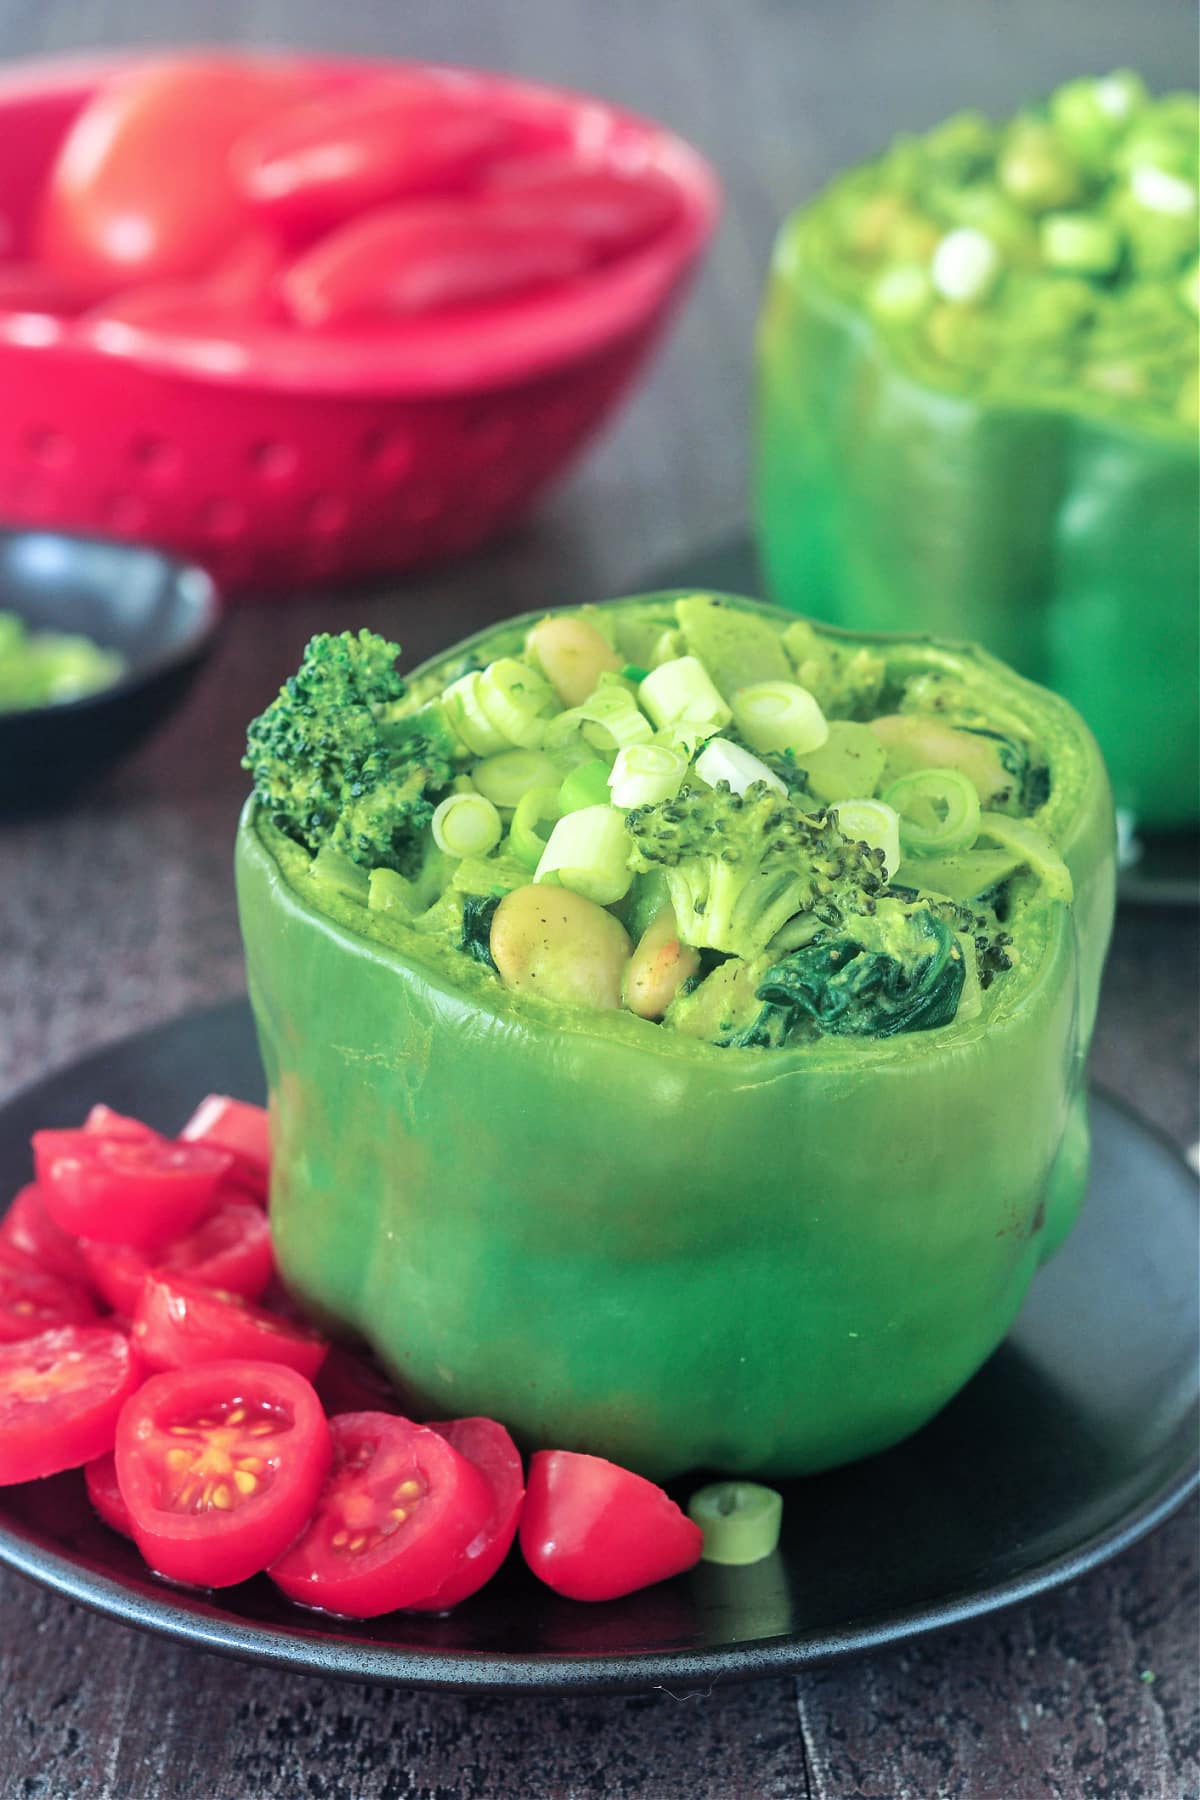 Two green bell peppers standing on matte black plates, tops sliced off and stuffed with a green goddess mixture of beans, broccoli, onion, riced palm hearts, and green goddess sauce. One plate is garnished with sliced red cherry tomatoes.